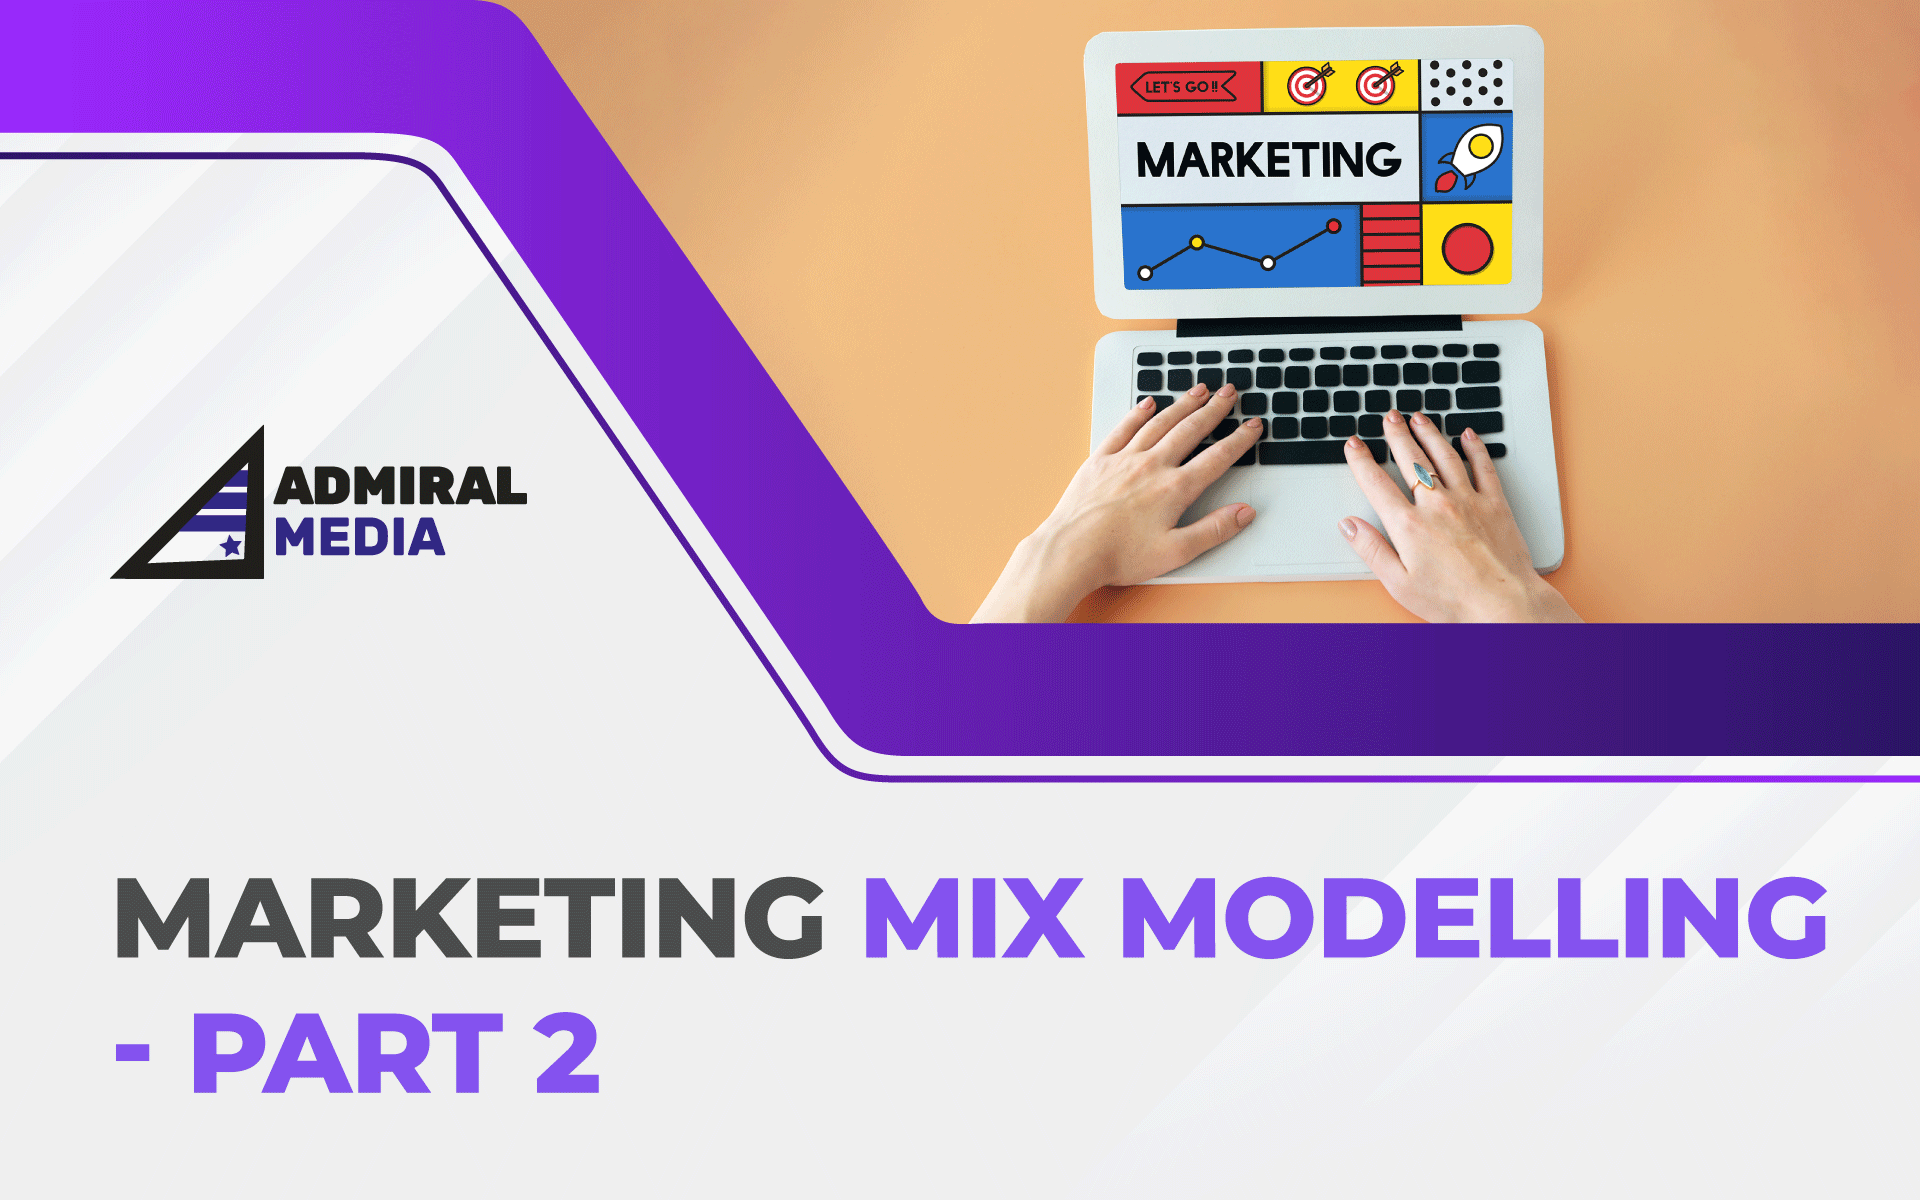 Marketing Mix Modelling - Part 2 by Admiral Media